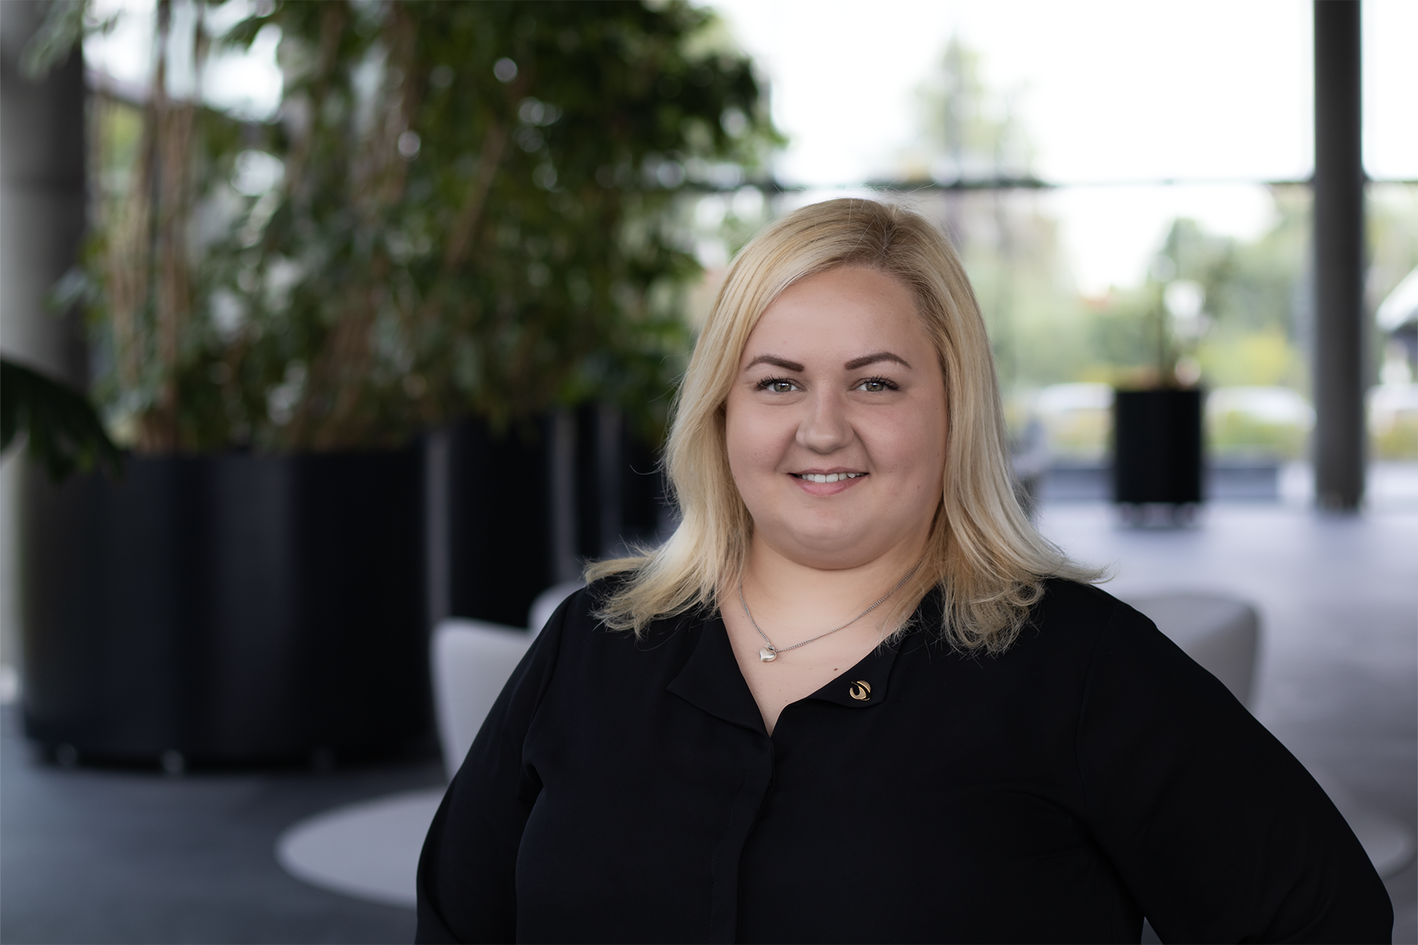 Jovita Kuncevičienė, Chief Accountant at Avion Express, on the uniqueness of accounting in the aviation sector and what personal traits help you grow in your career